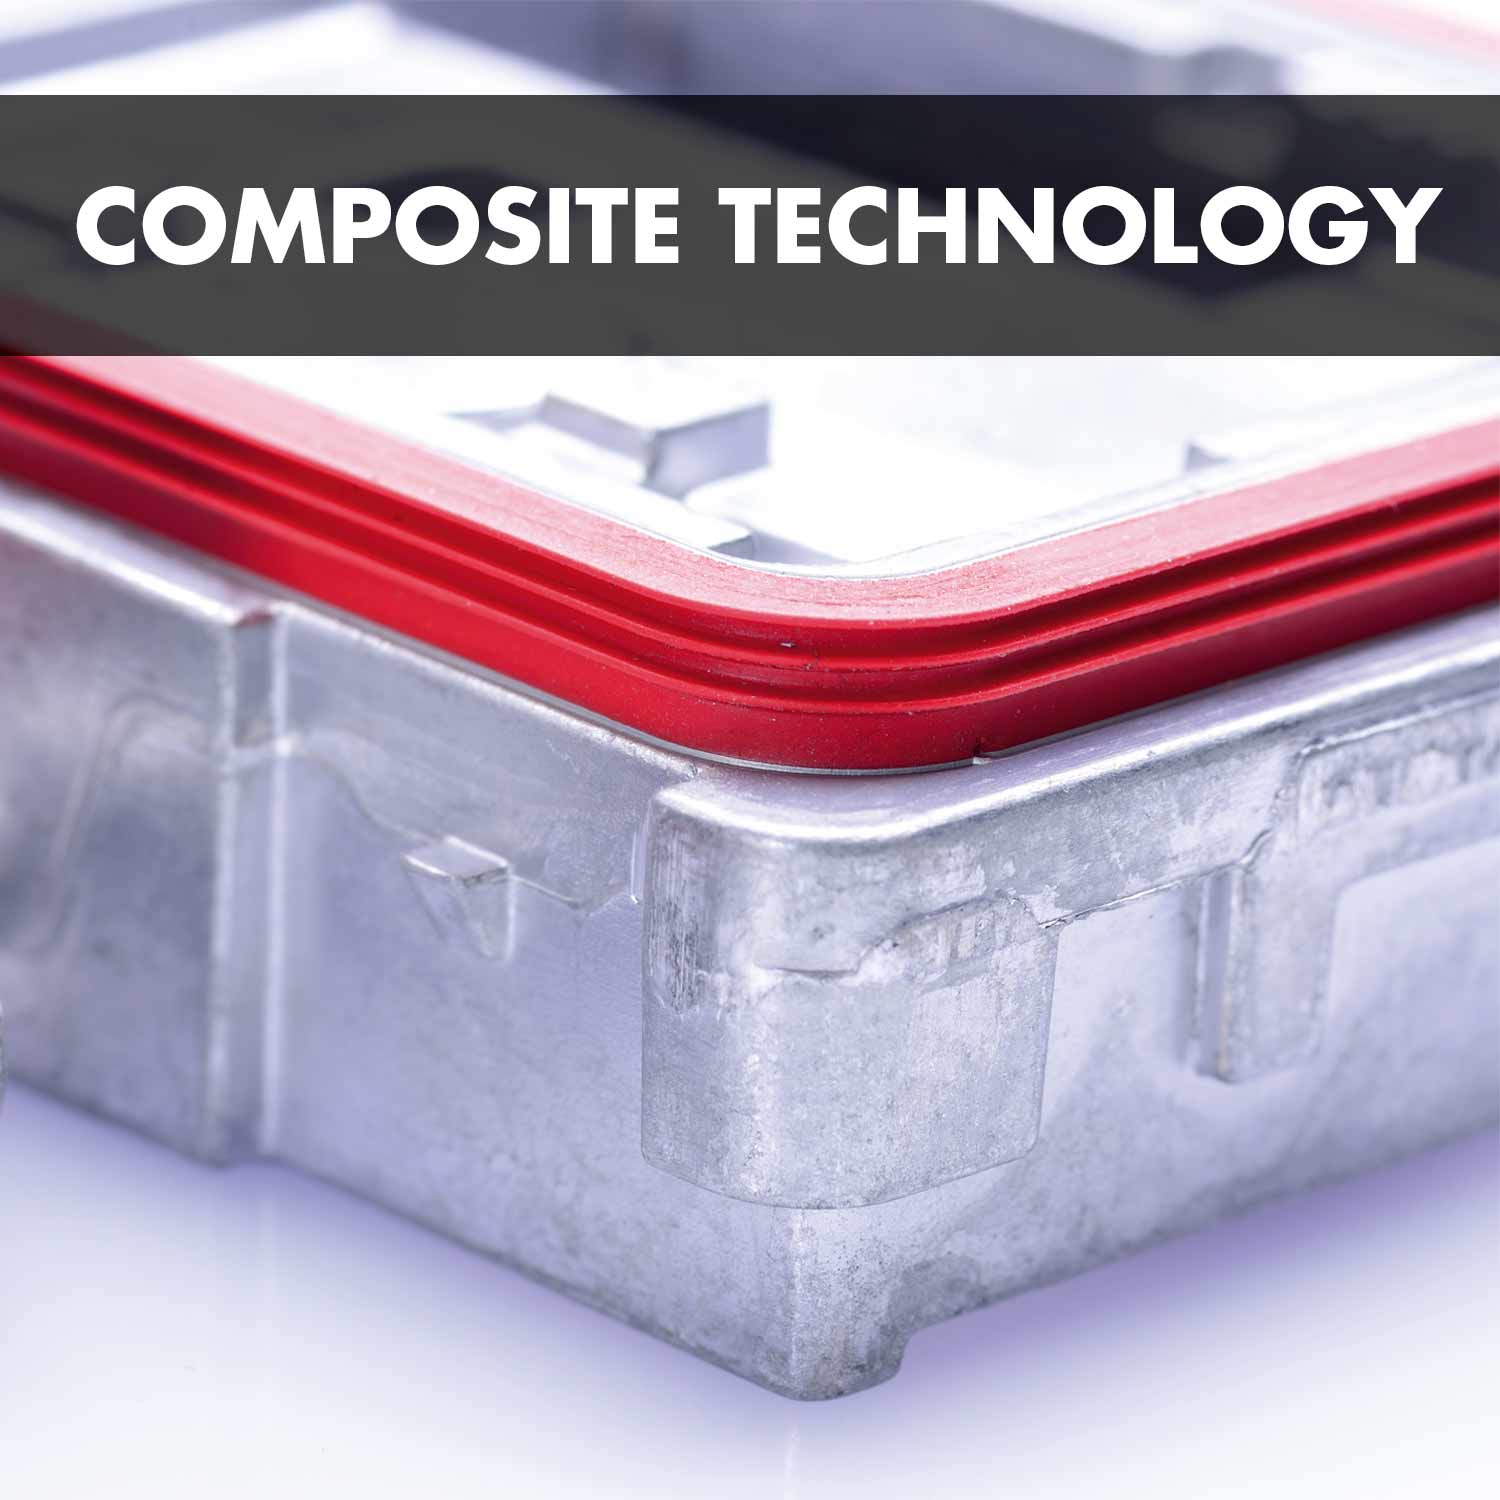 Composite technology: Elastic material vulcanised onto solid support materials.